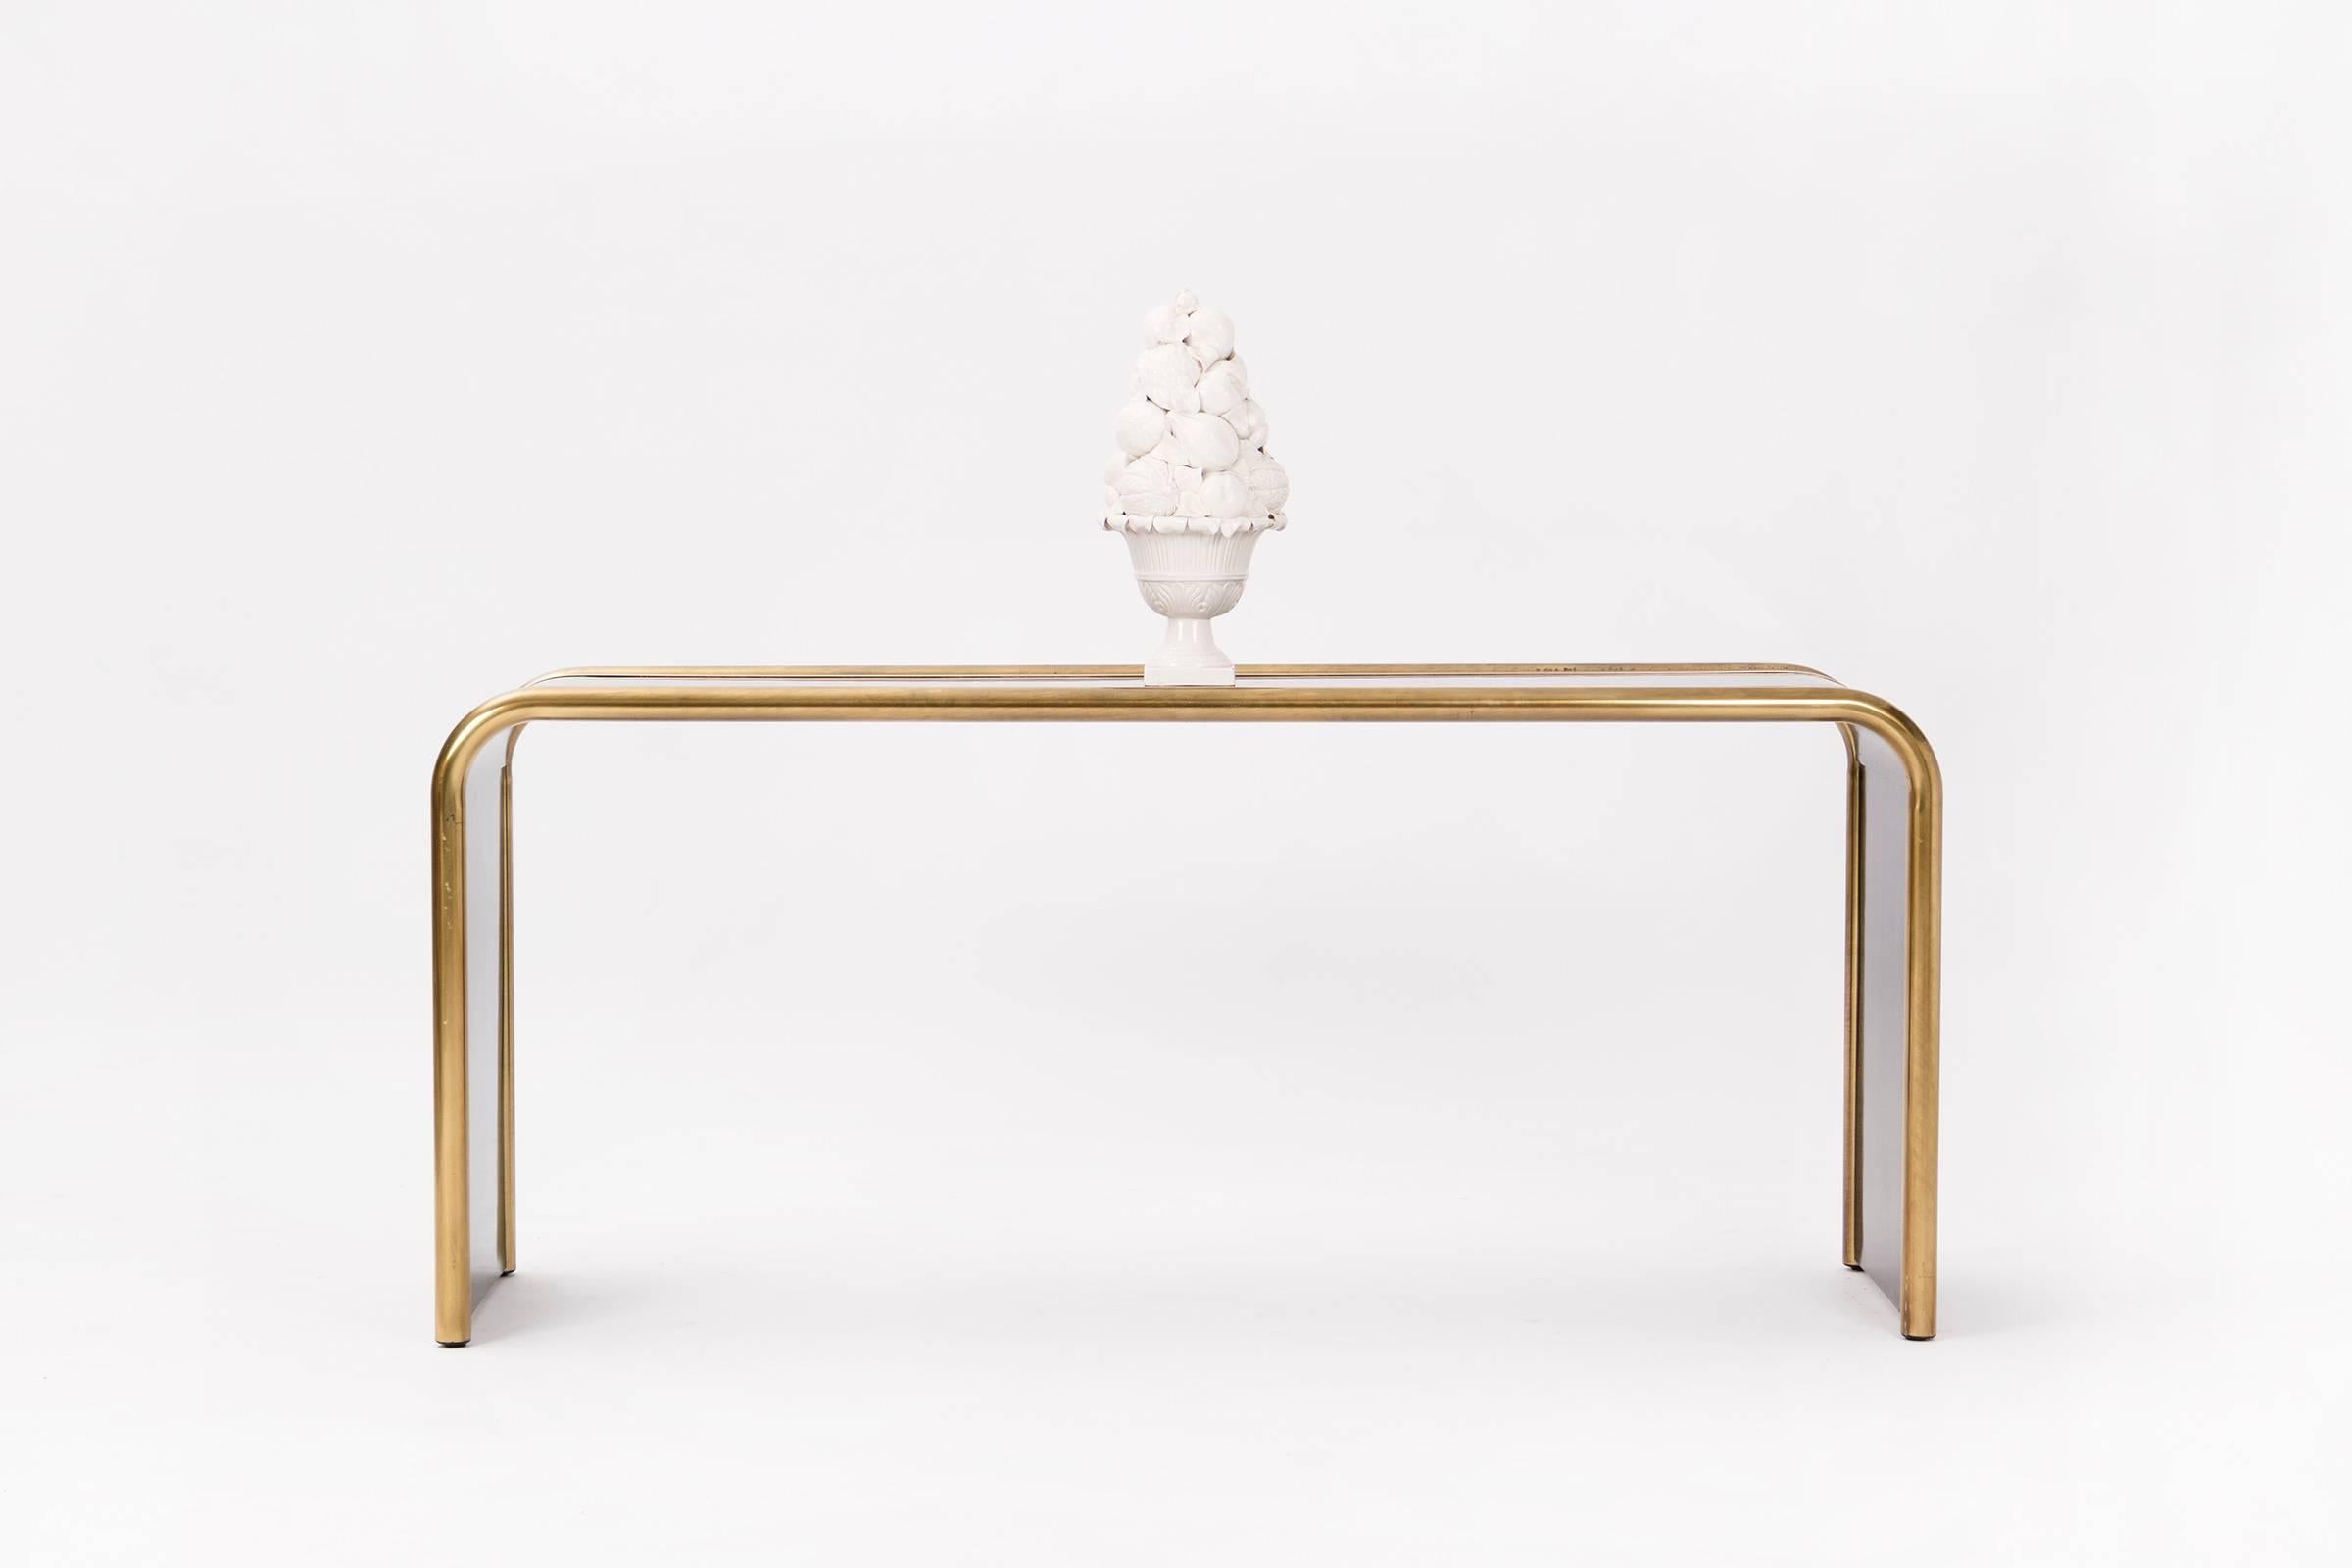 Metal Mastercraft Console Table